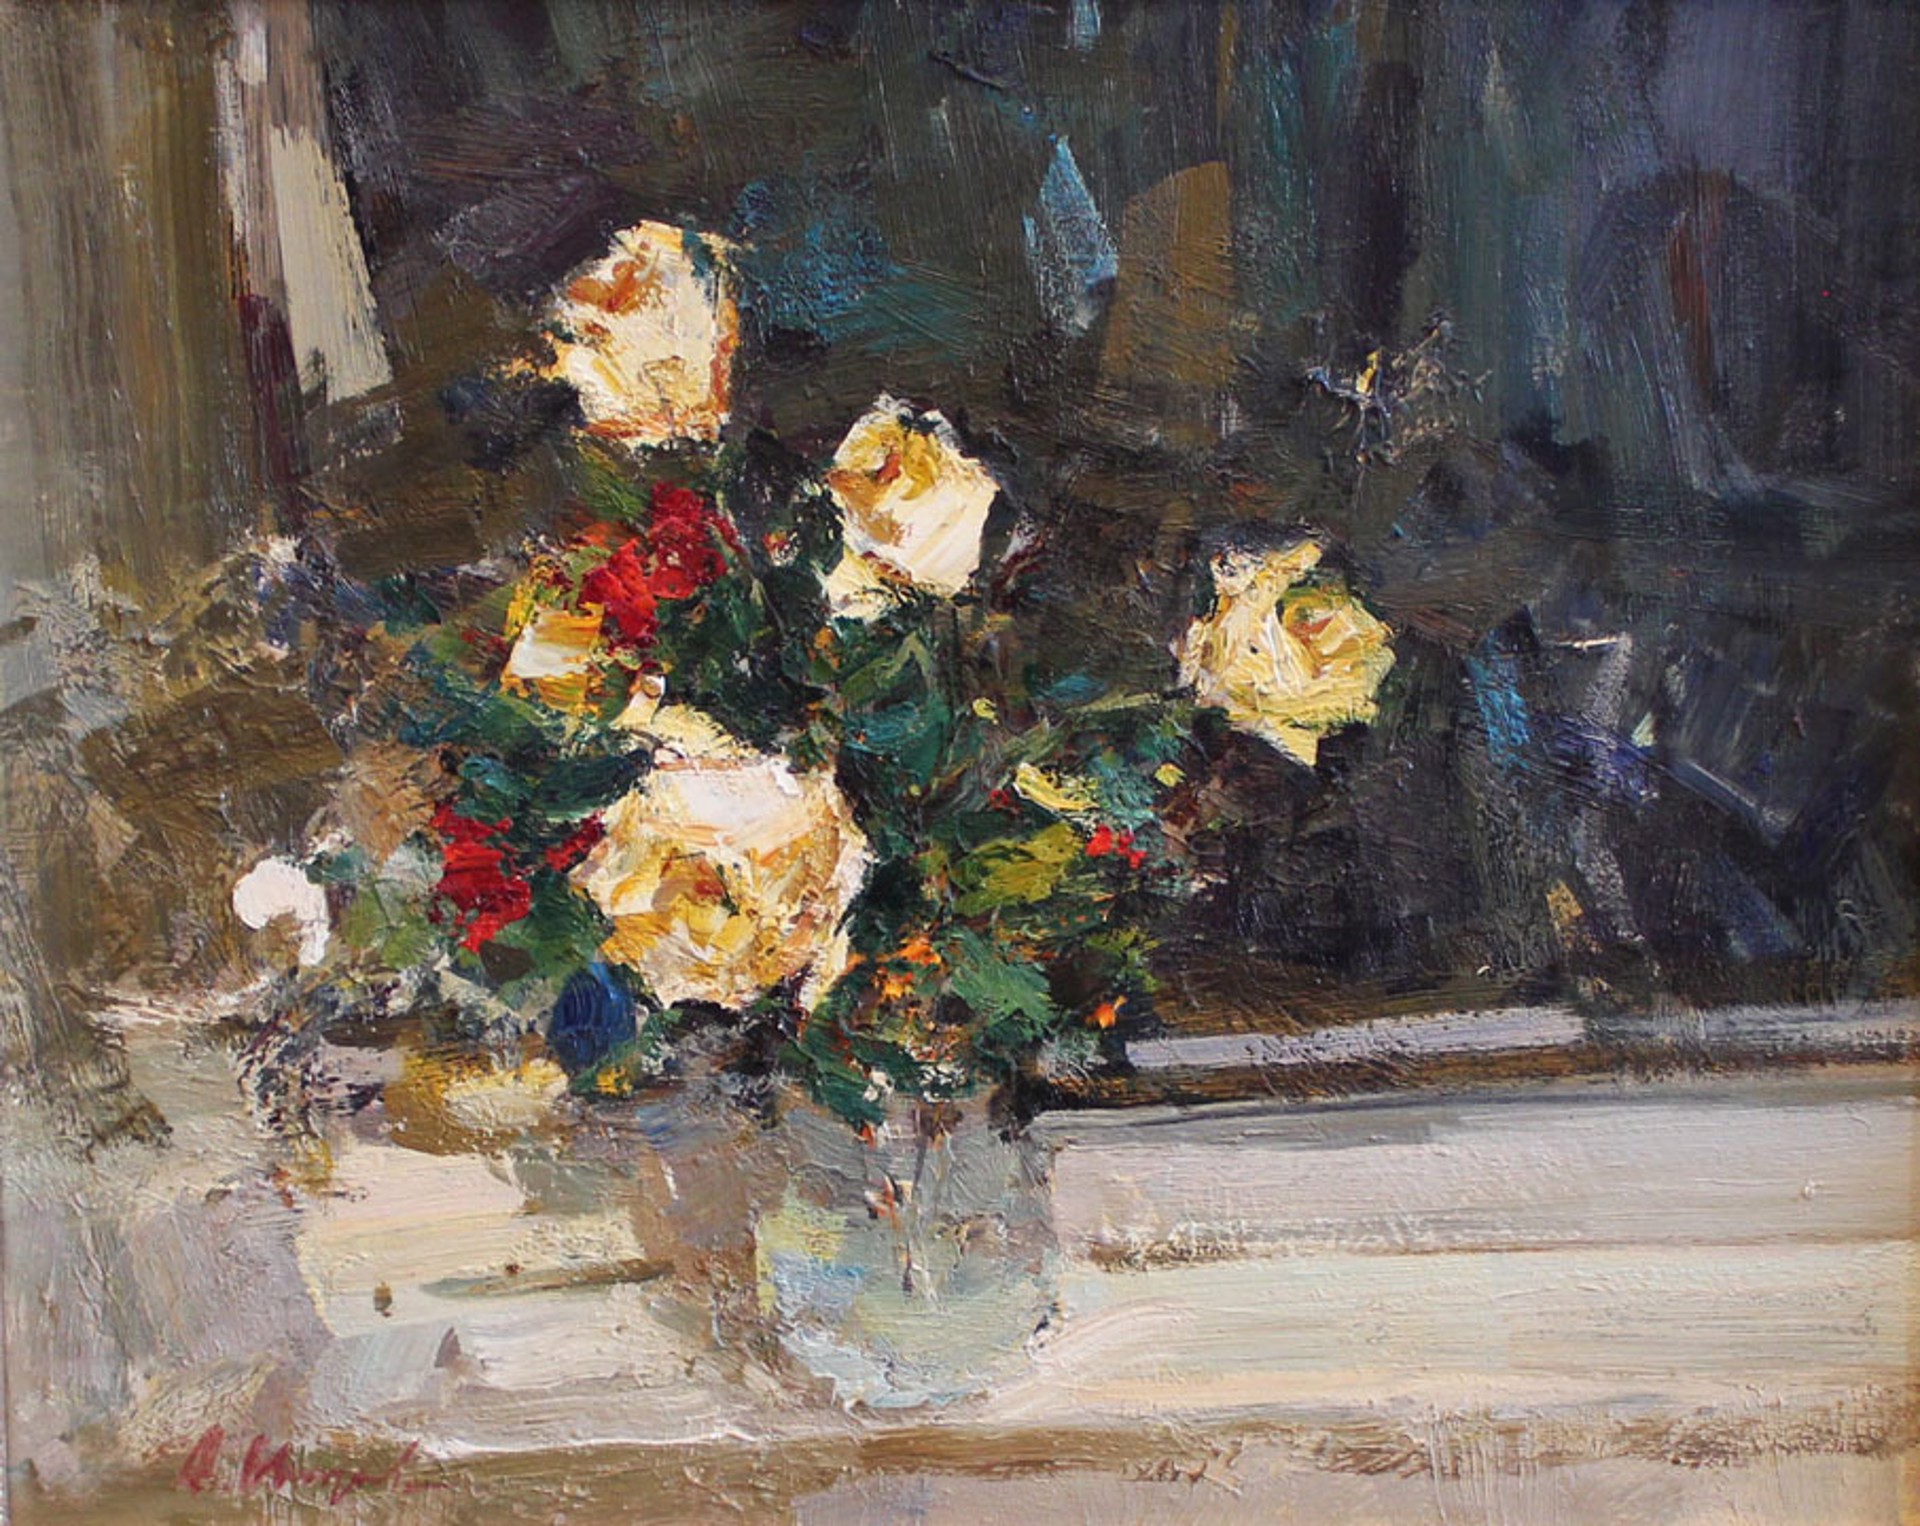 Roses Nocturne by Andrey Inozemtsev